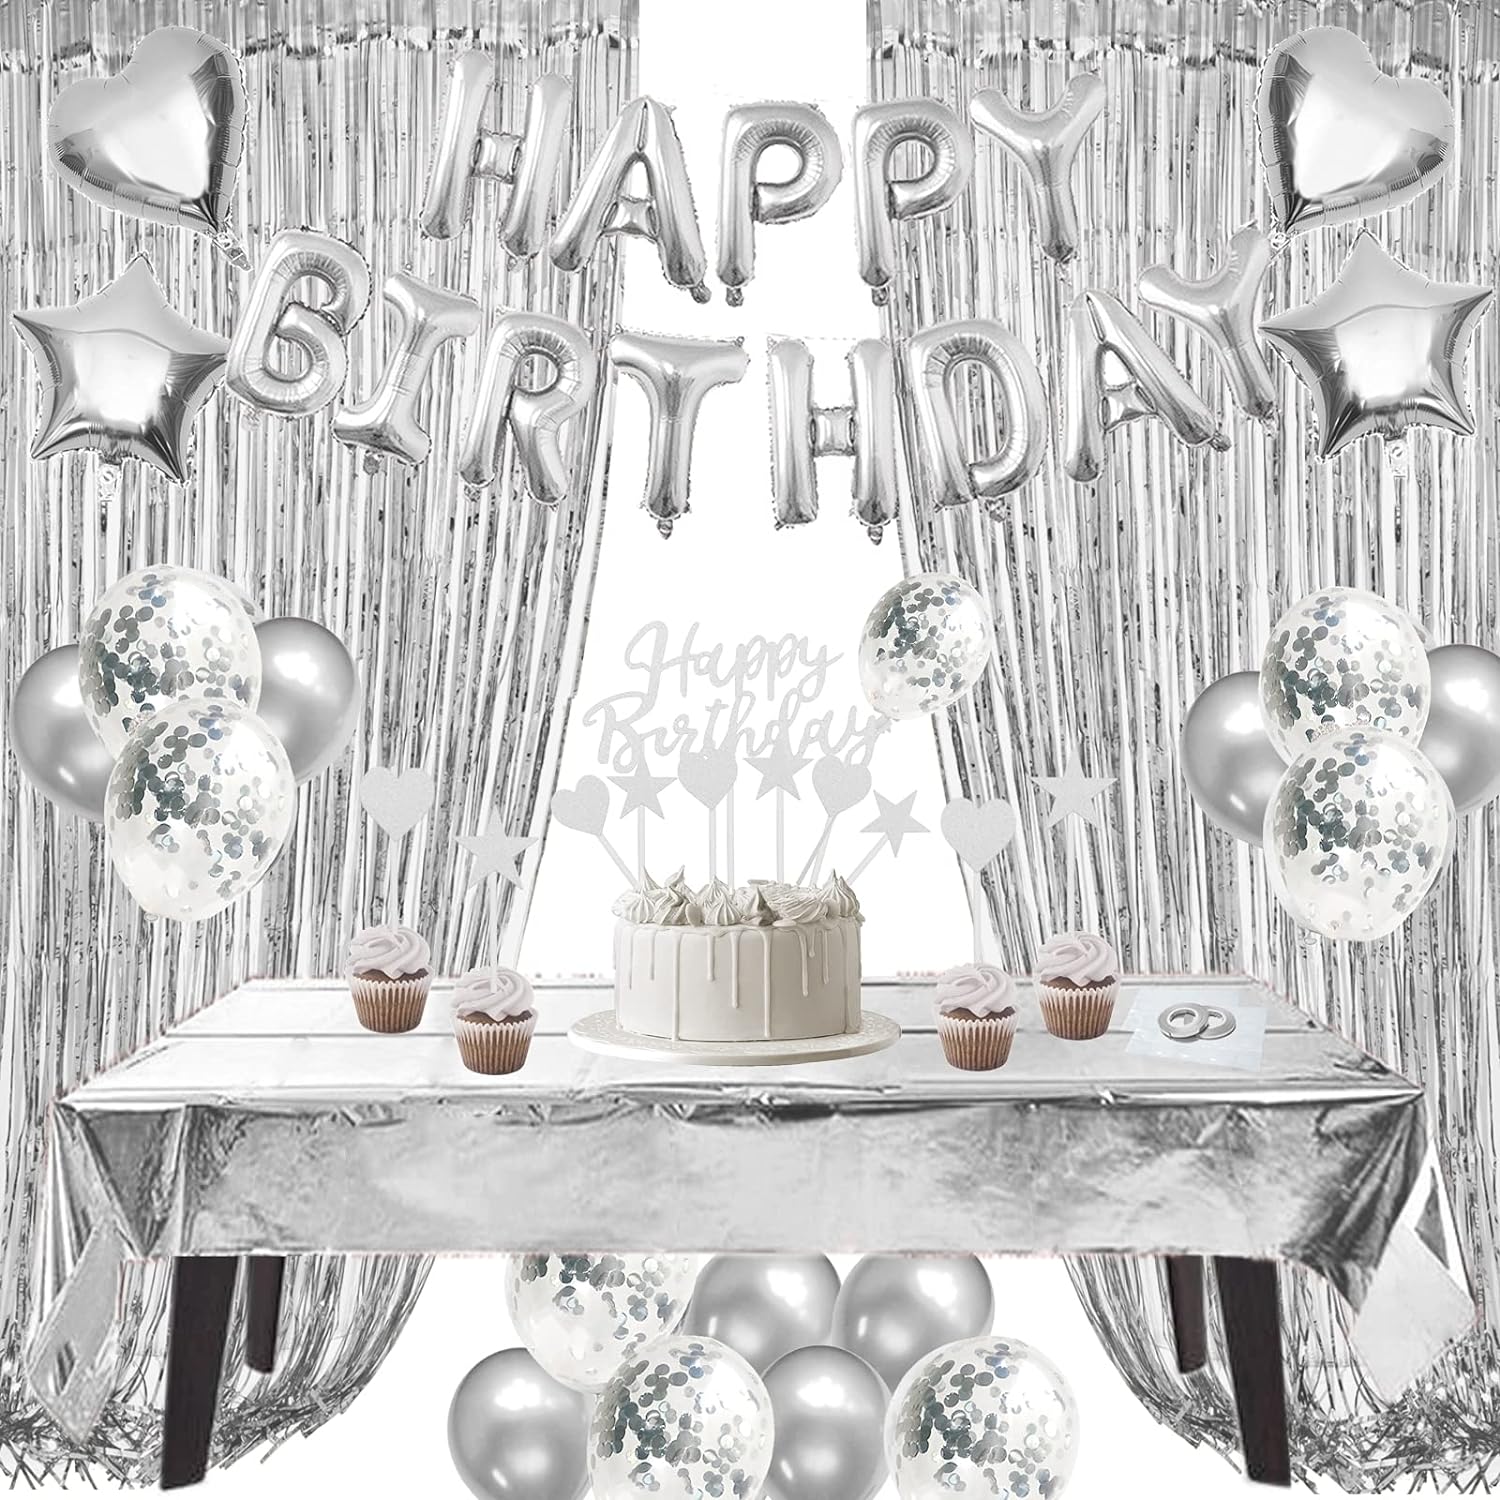 ZERODECO Birthday Decorations Silver, Foil Happy Birthday Balloon Banner Tablecloth Fringe Shiny Curtains Cake Flag Star and Heart Balloons Confetti Latex Balloons for Birthday Party